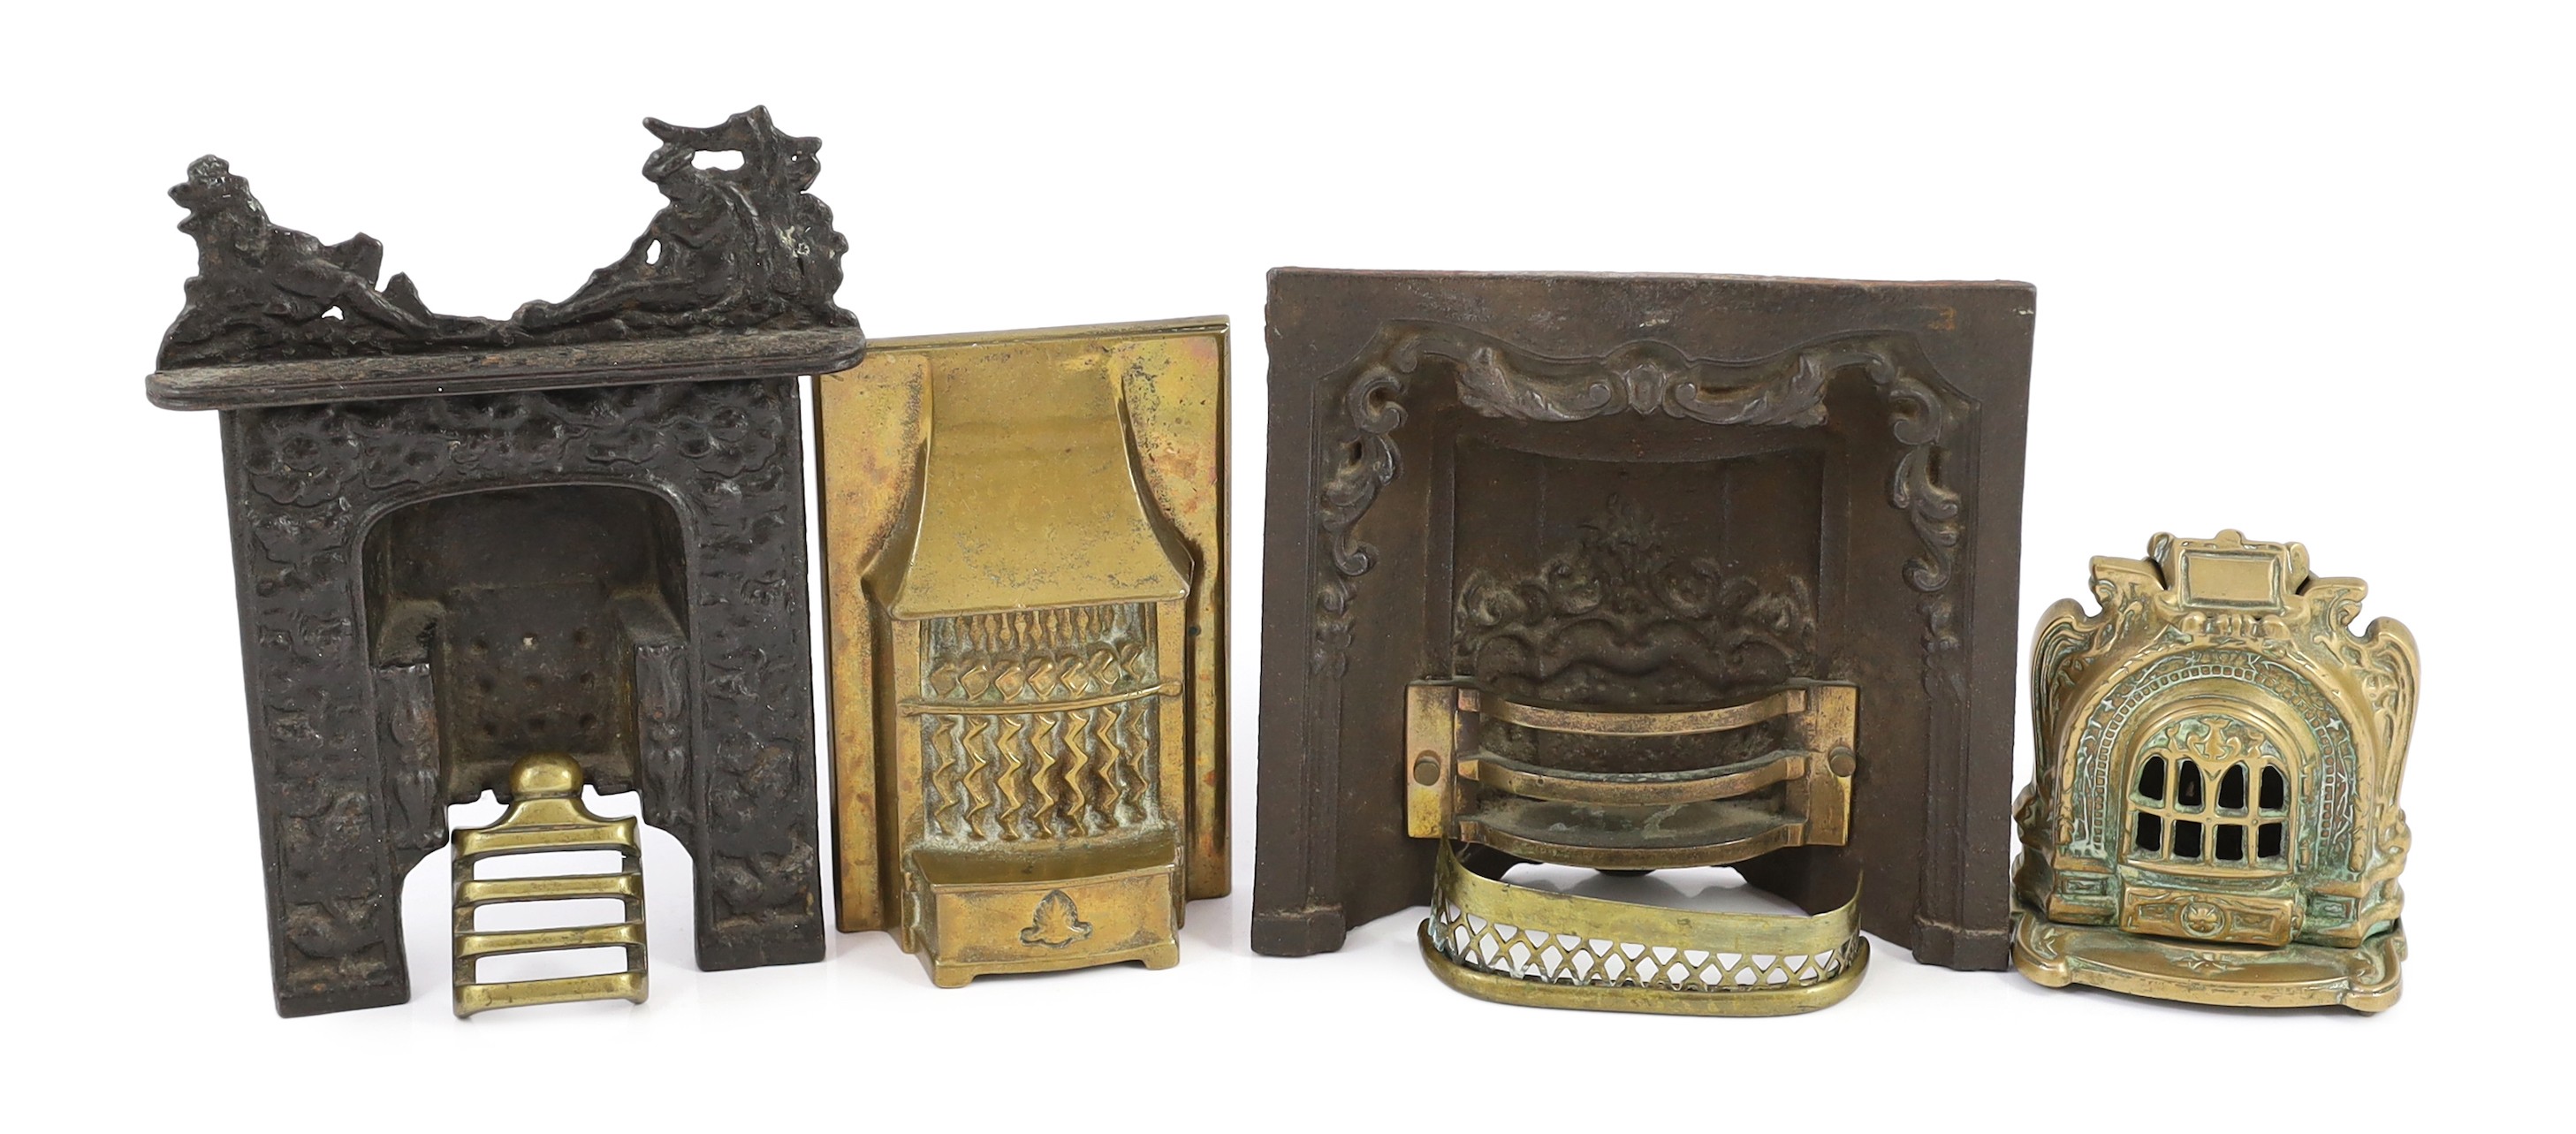 Two Victorian cast iron fire grate models, and two cast brass fire grate models, largest 8in. wide                                                                                                                          